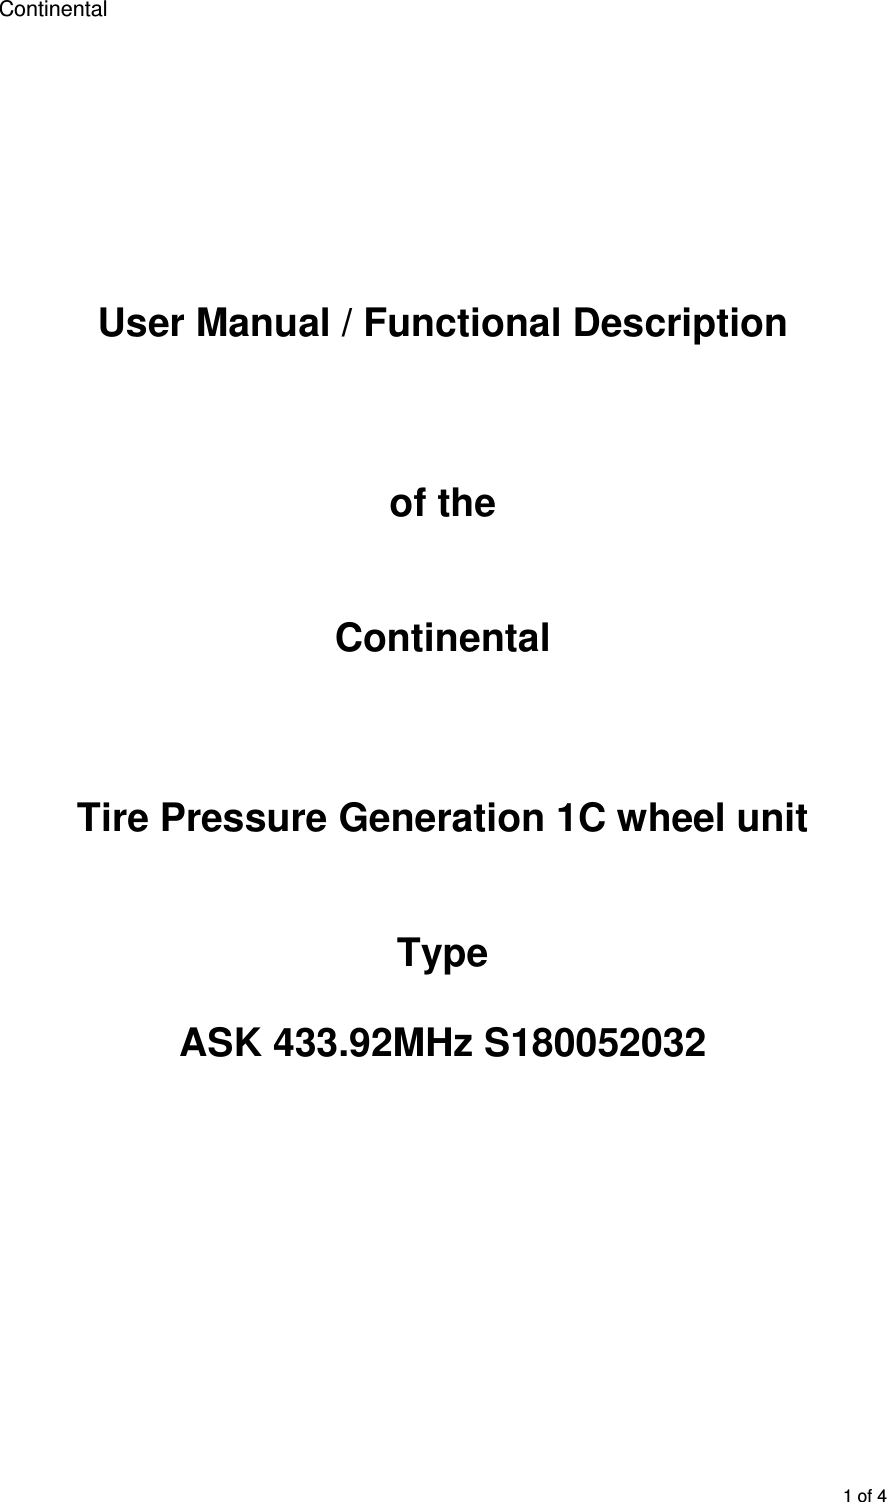 Continental      1 of 4       User Manual / Functional Description    of the   Continental    Tire Pressure Generation 1C wheel unit   Type   ASK 433.92MHz S180052032         